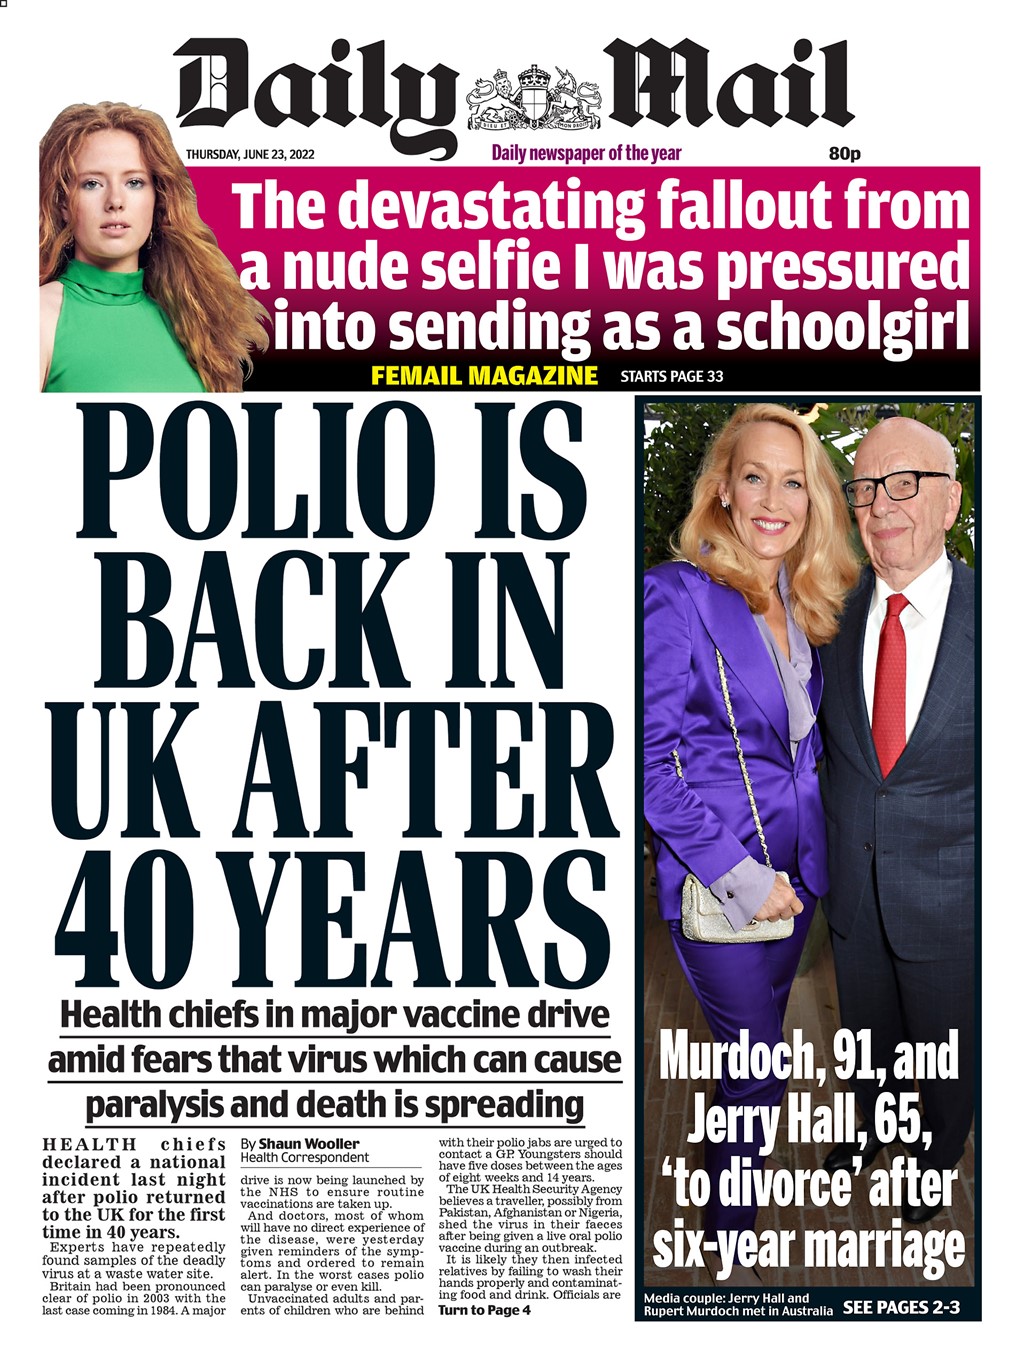 Polio is on the Front Pages of British Newspapers